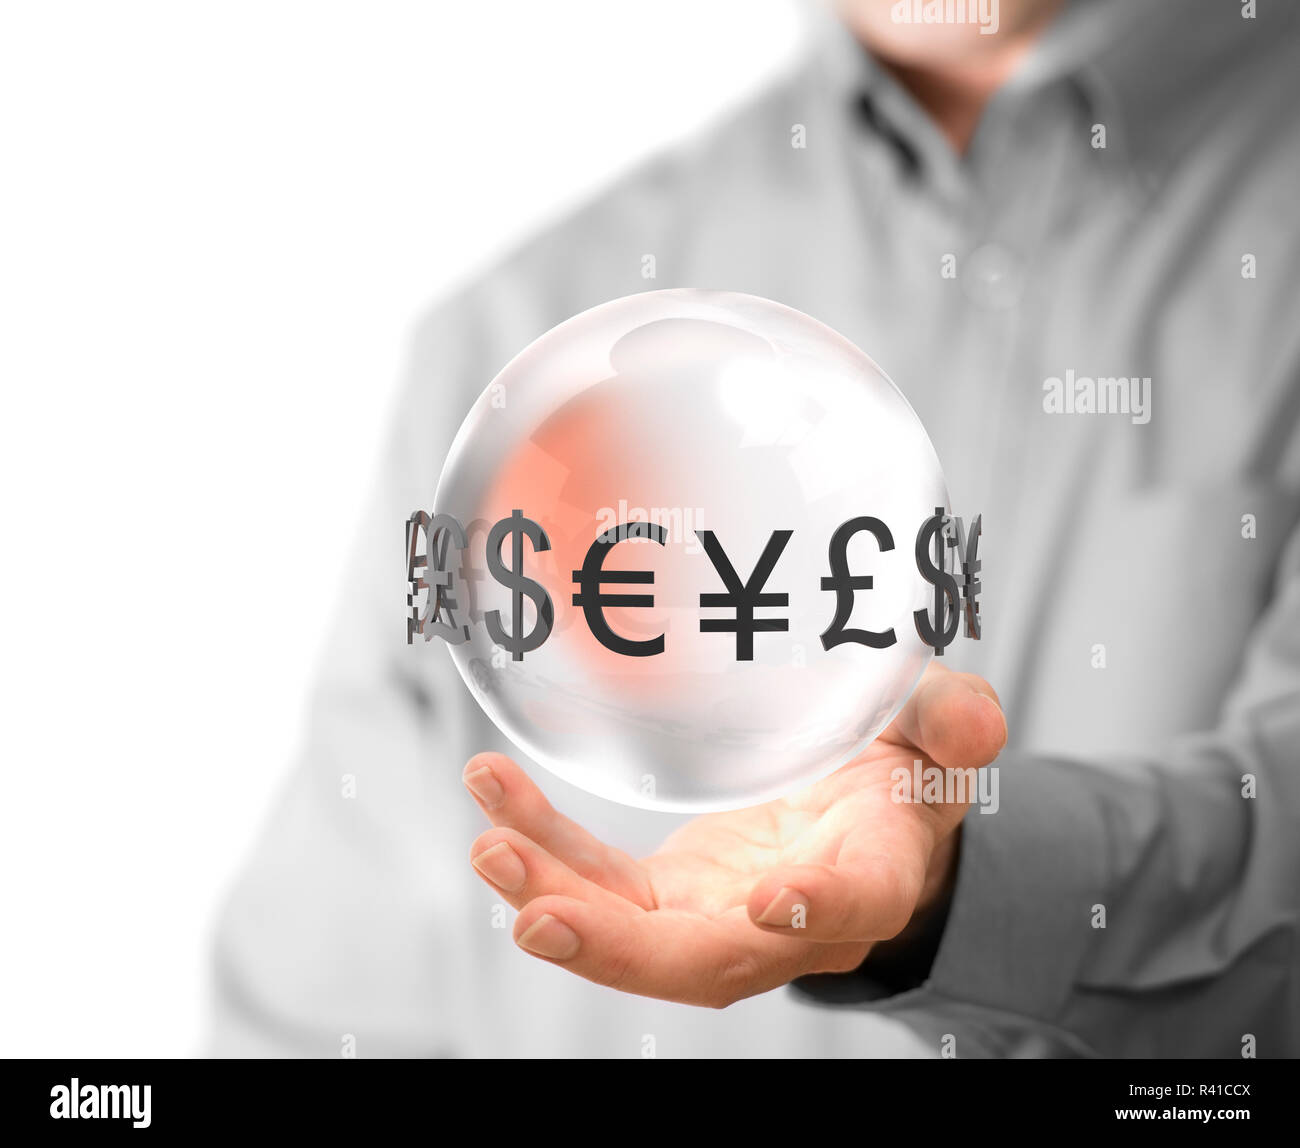 Currency Exchange Service Stock Photo